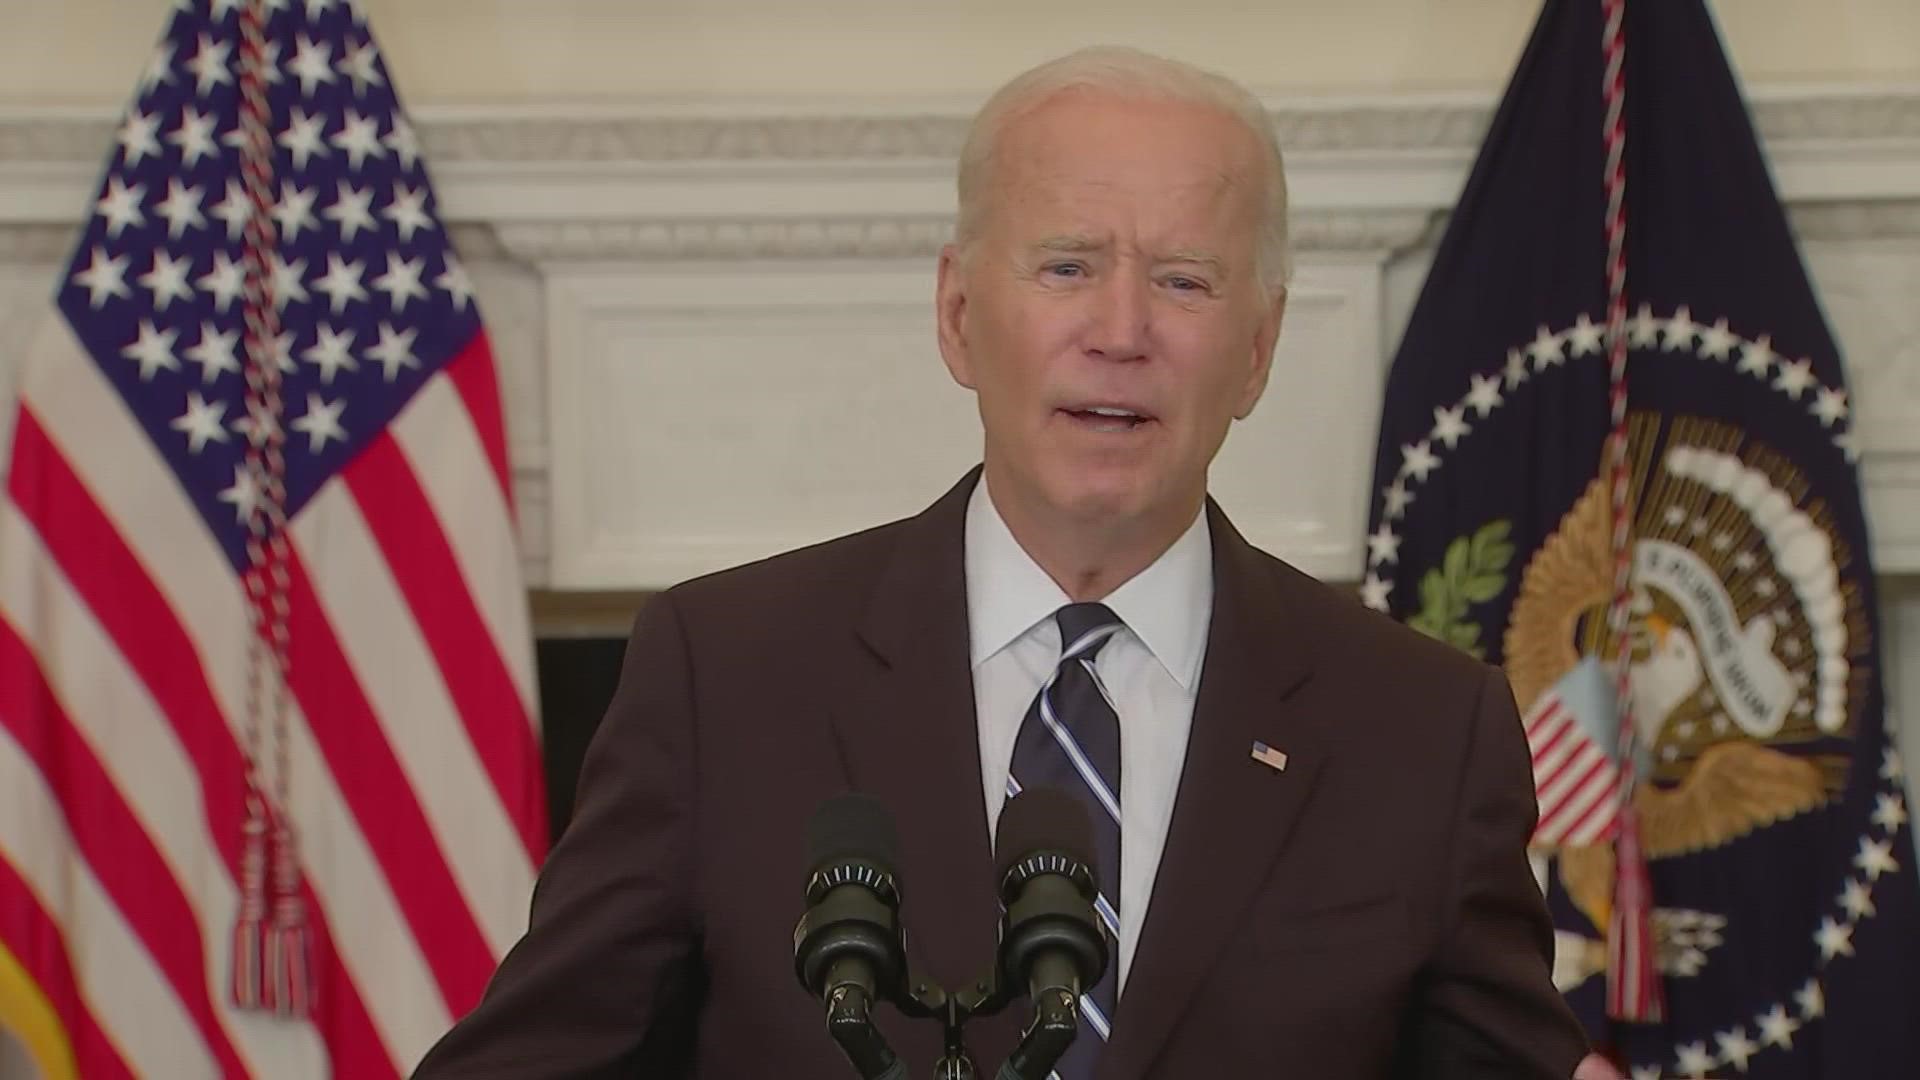 Biden urged all state governors Thursday to require COVID vaccines in schools and vowed to work against governors who threaten to take funds from schools.